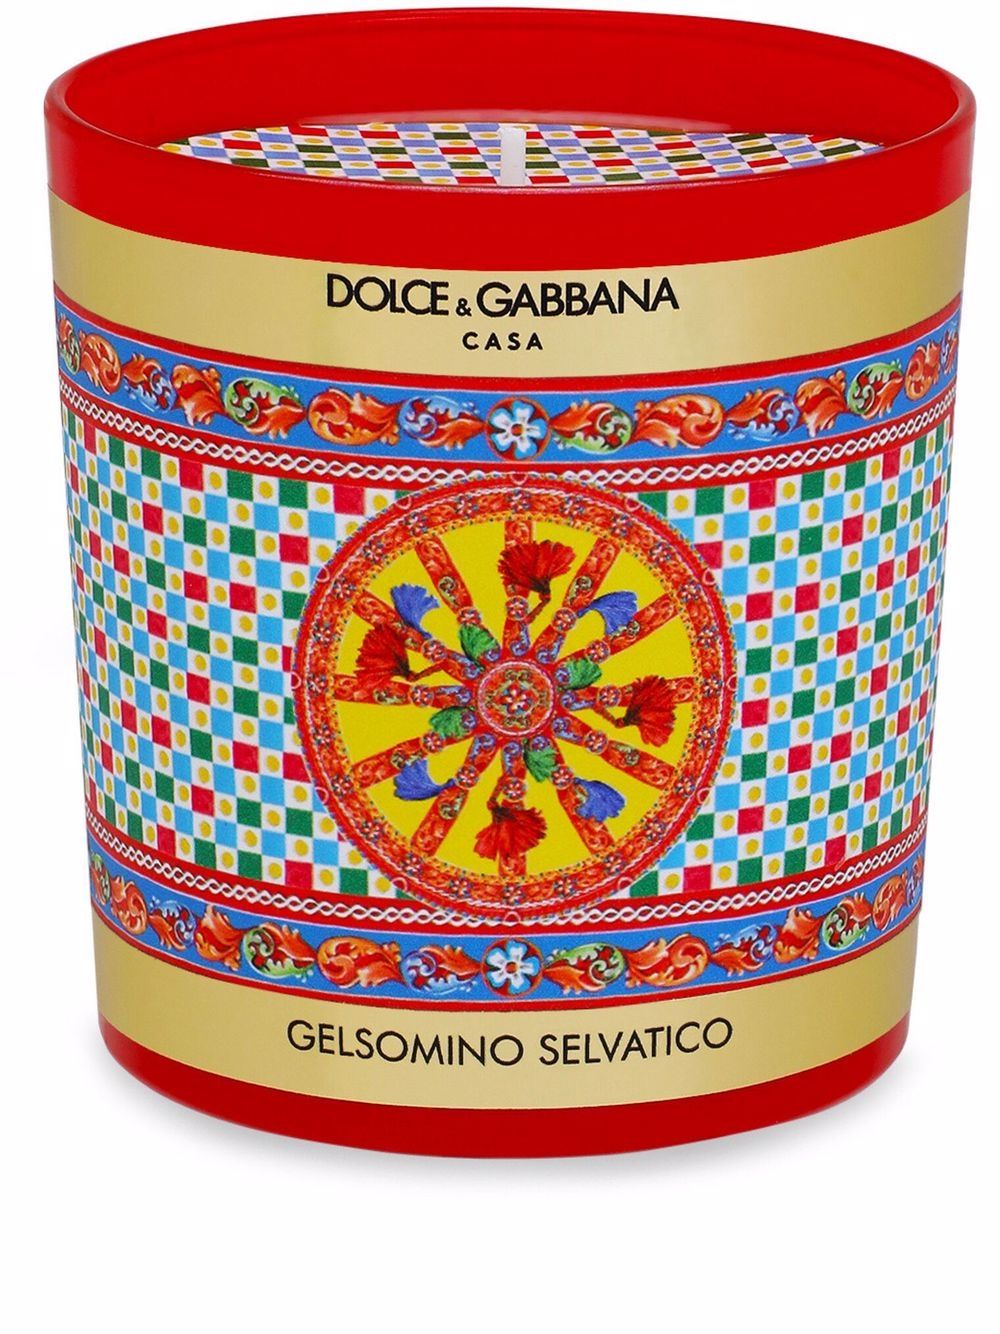 Arriba 72+ imagen dolce and gabbana scented candles